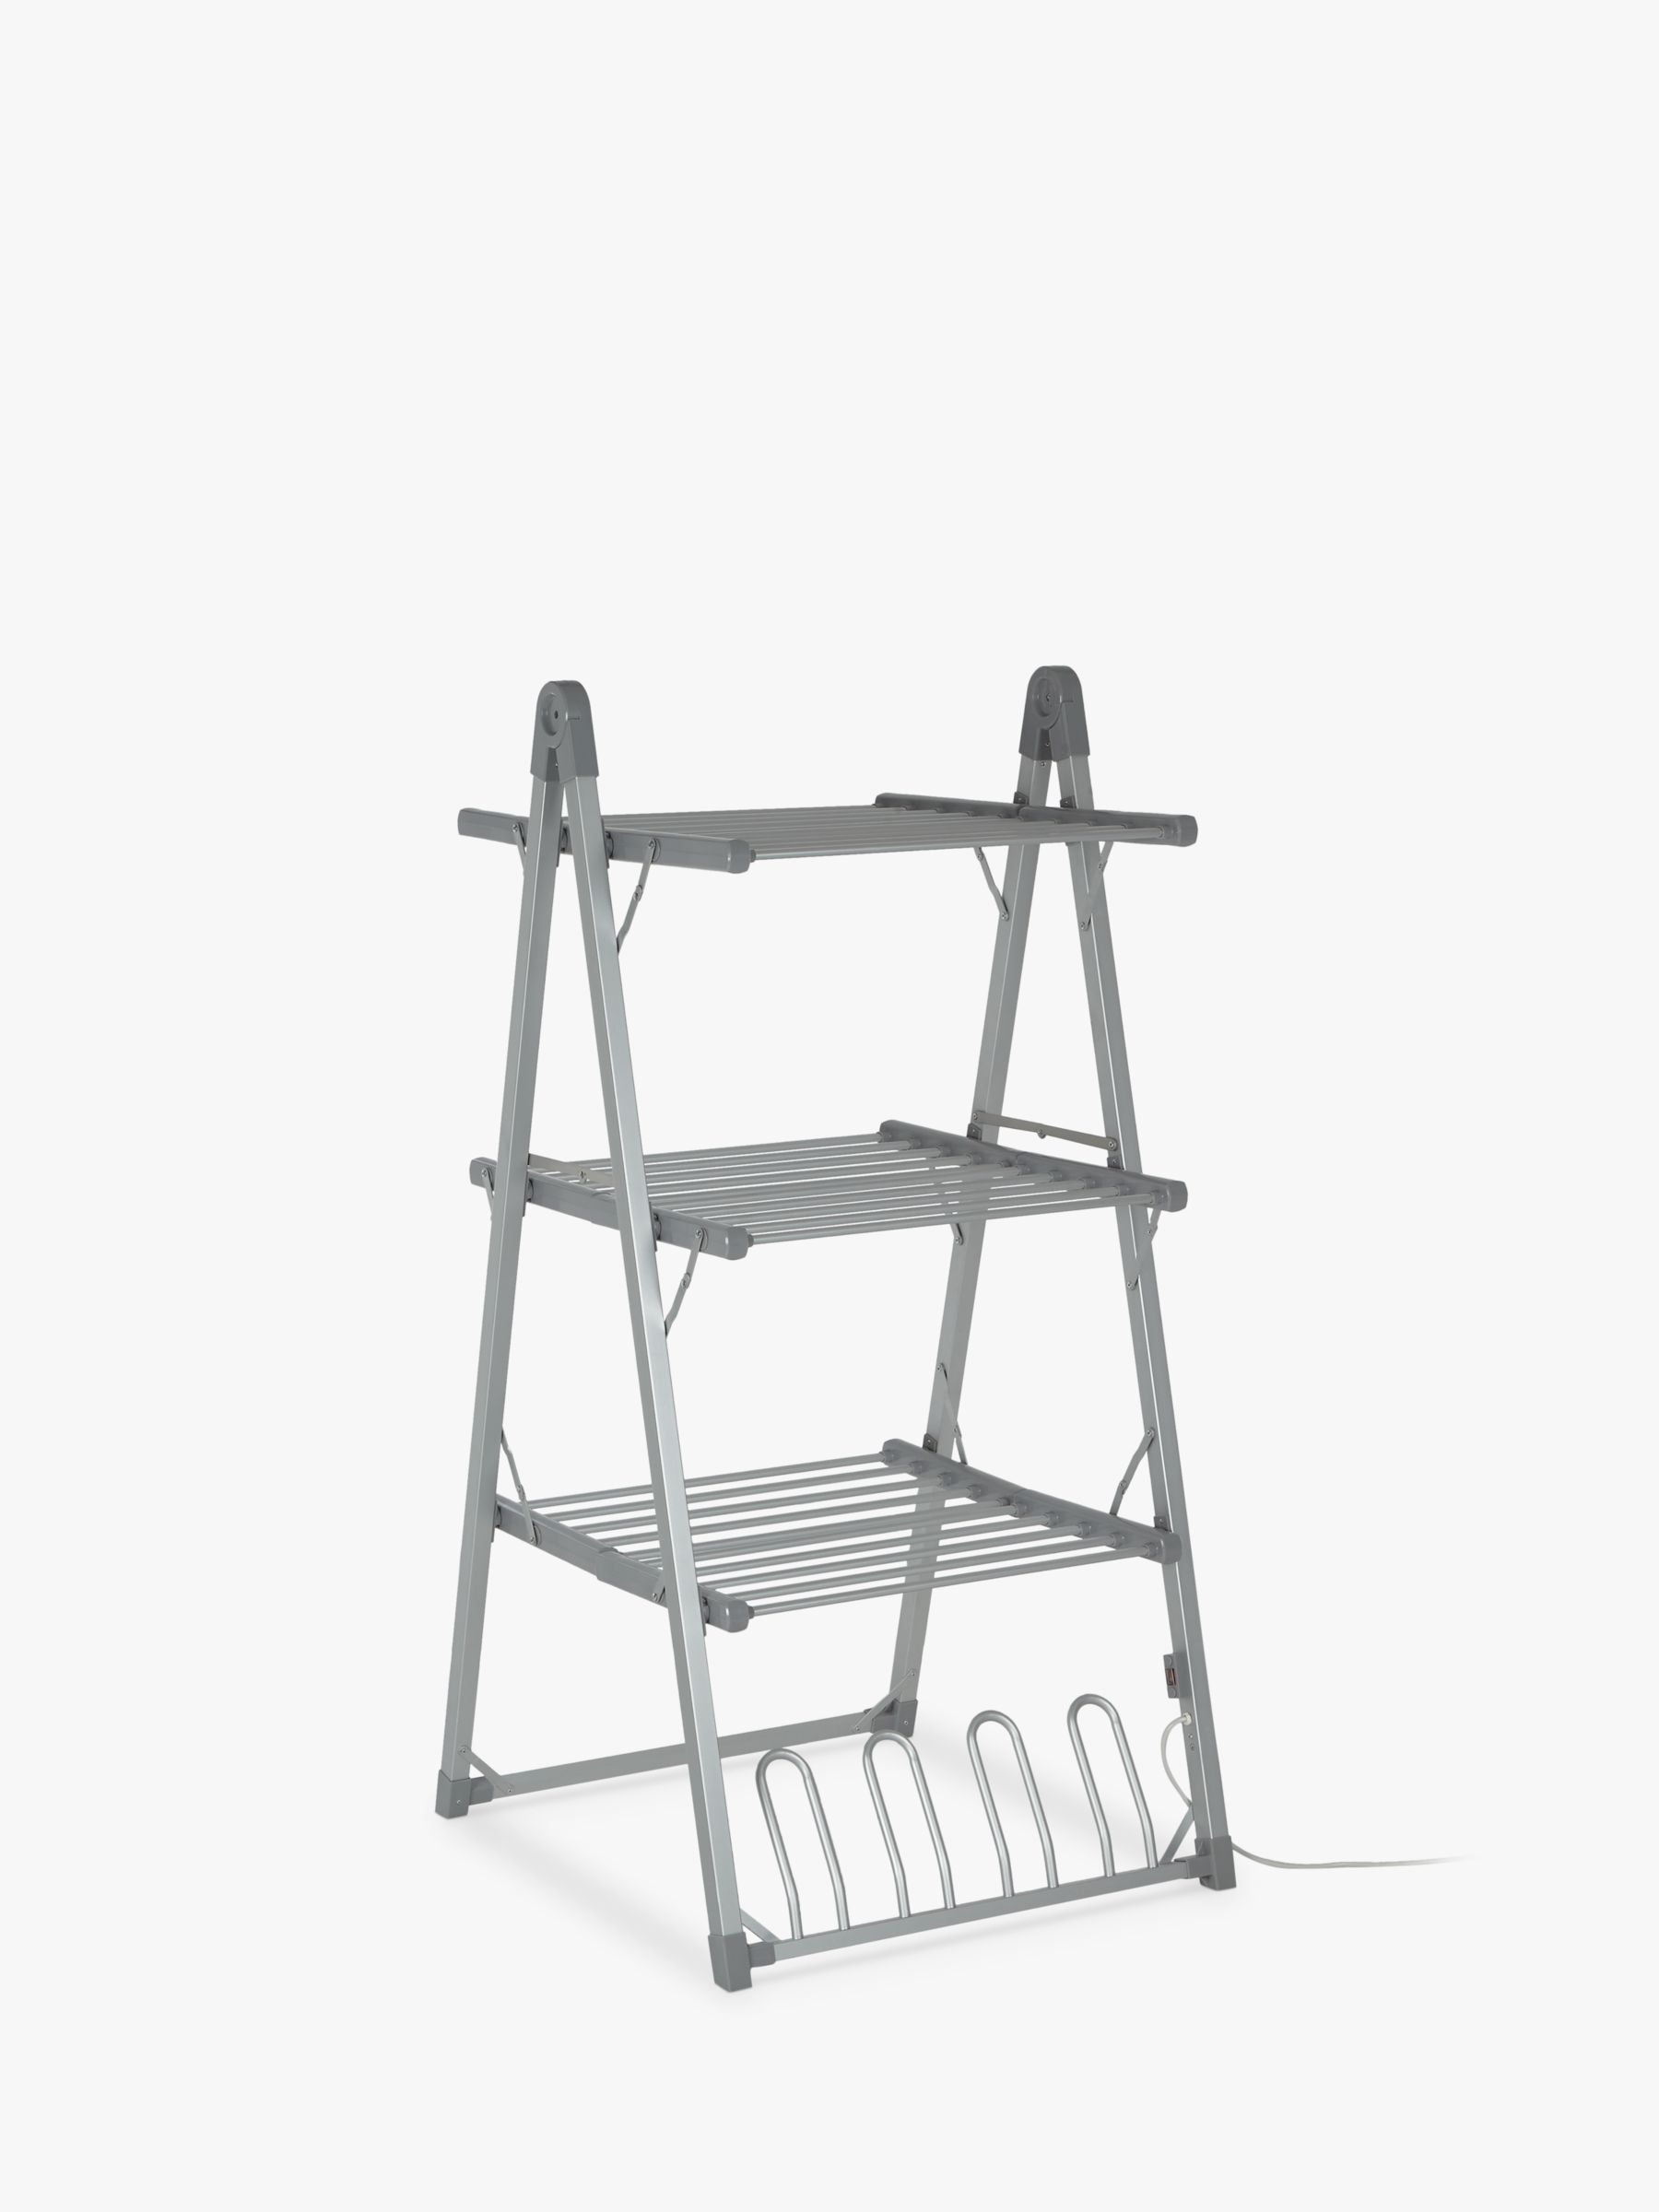 Highlands 3 Tier Space Grey Silver Metal Clothes Airer Indoor and Outdoor Laundry Horse Drying Rack 15 m 139x61x44 approx